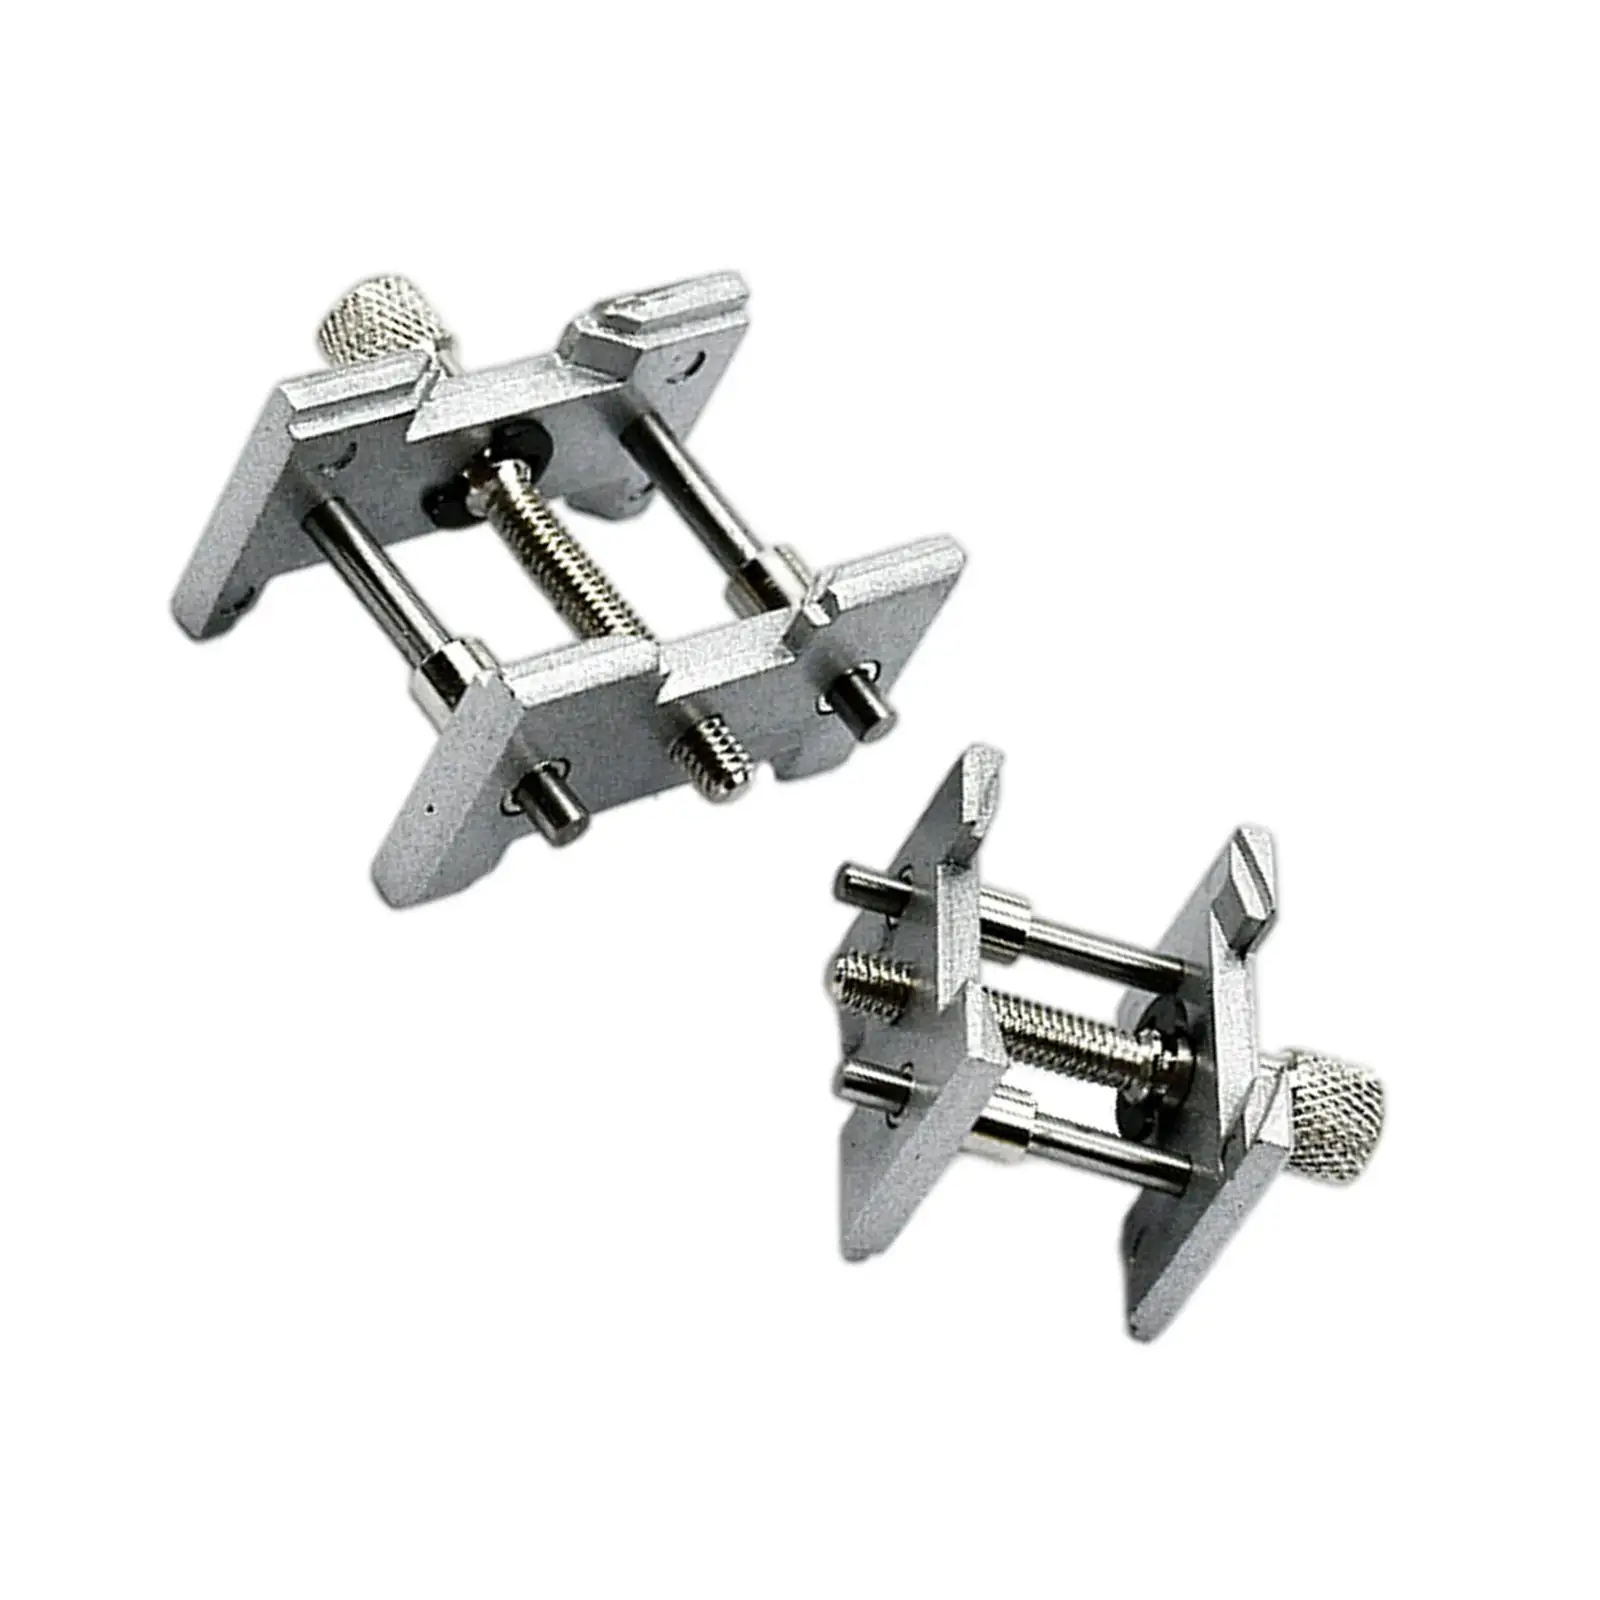 2x Watch Movement Holder Maintenance Extensible Alloy Reversible Clip Opening Holder, Fixed Base for Watchmaker ,Accessory